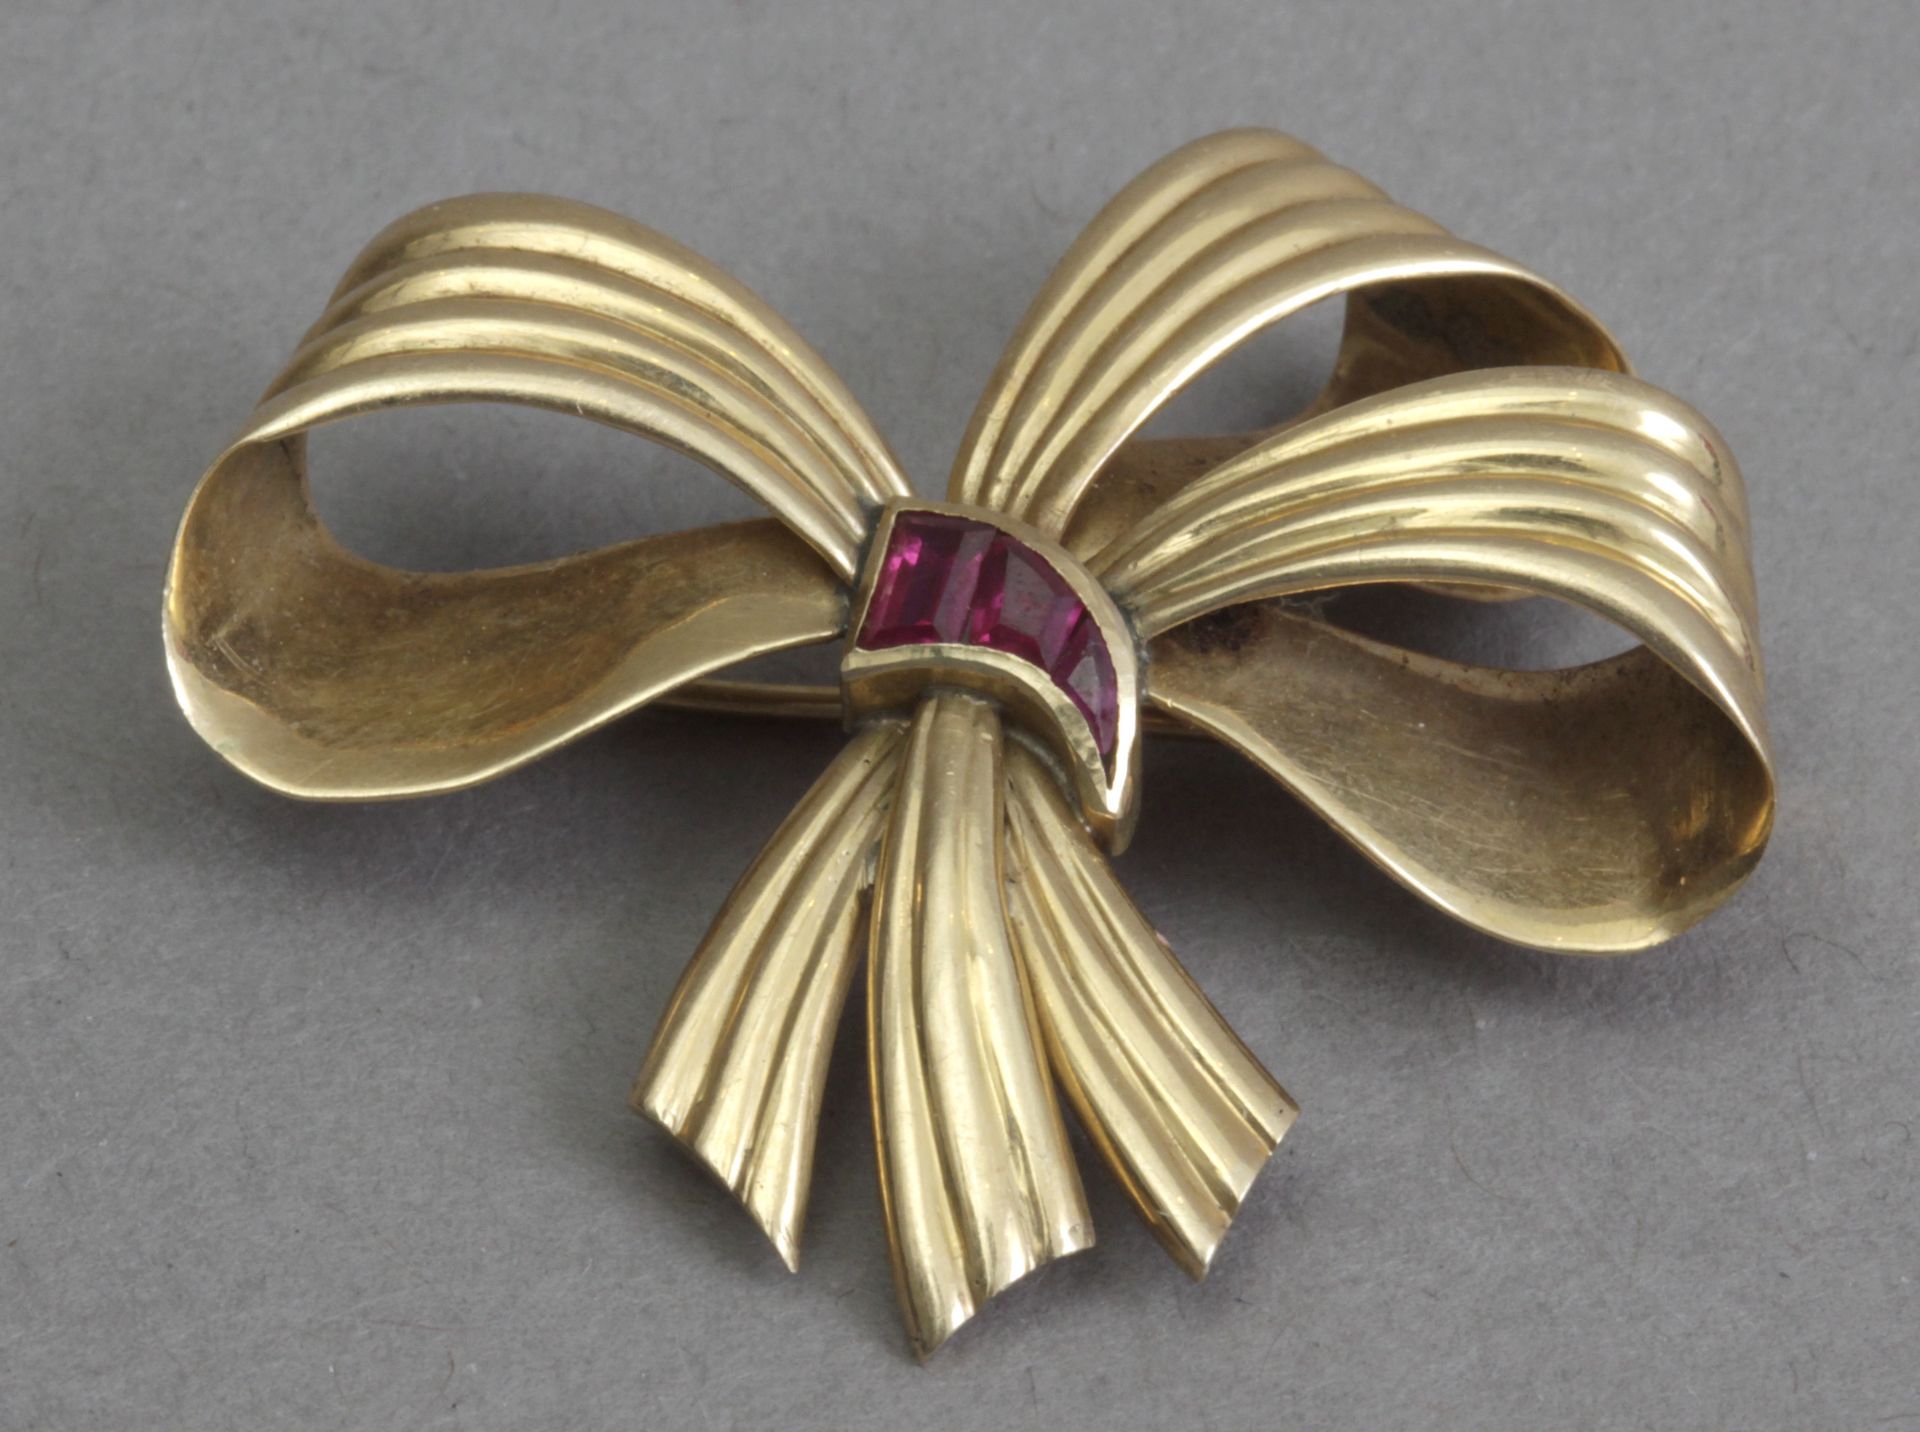 A first half of 20th century rubis and 18k. yellow gold brooch - Image 2 of 3